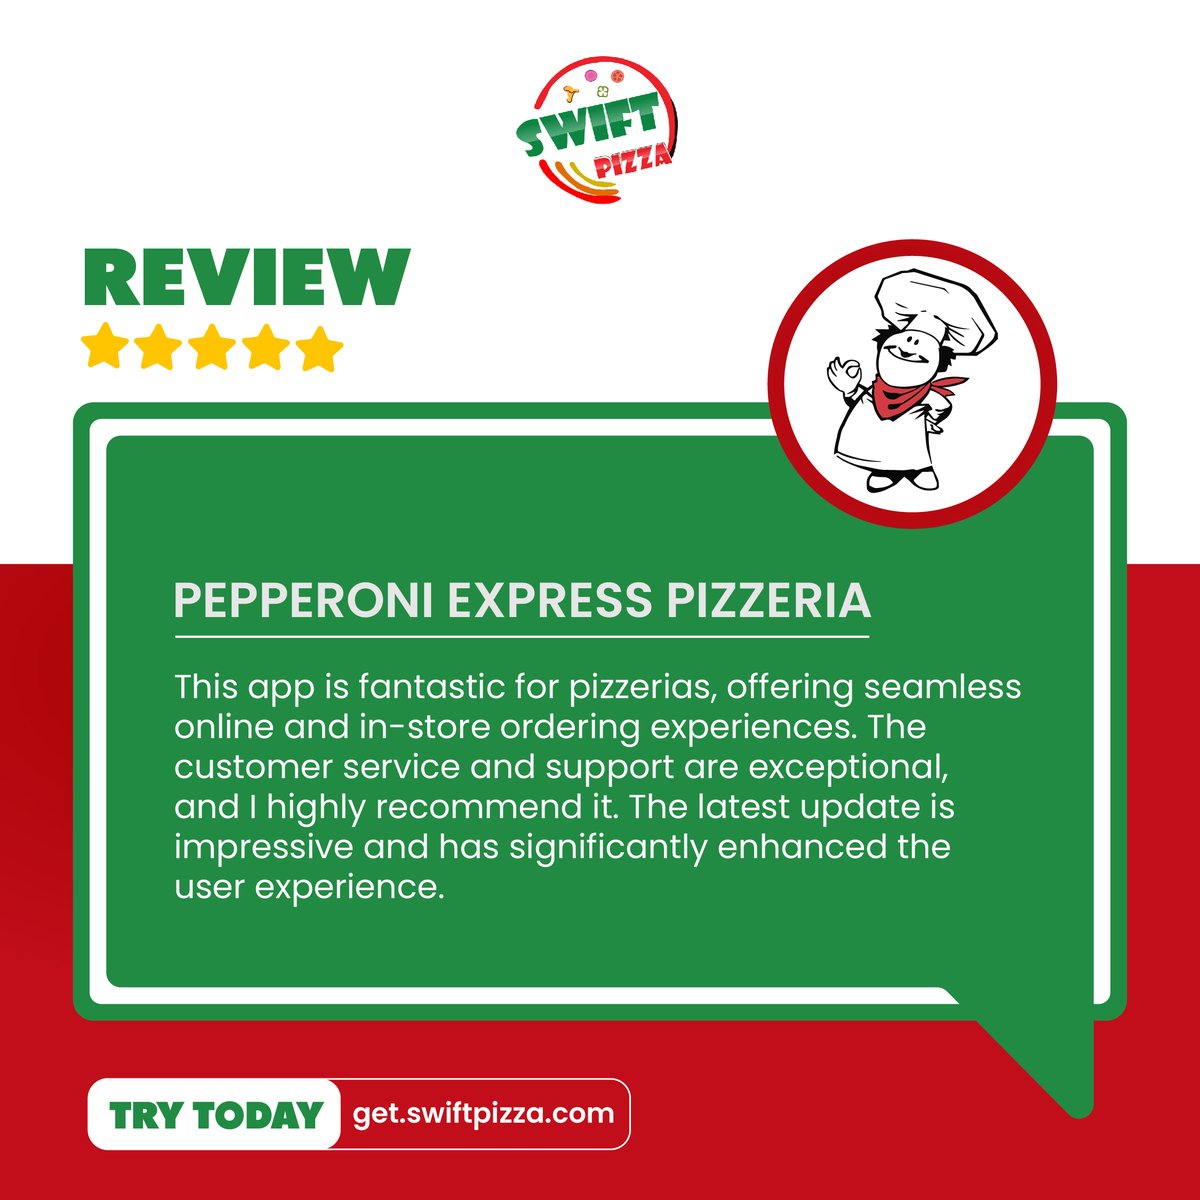 We're absolutely thrilled to receive such positive feedback about our app! Knowing it provides a fantastic experience for pizzerias, both online and in-store, truly warms our hearts. 💖
#CustomerReview #pizzeria #pizzastore #PizzaPerfection #customerfeedback #PizzaTime